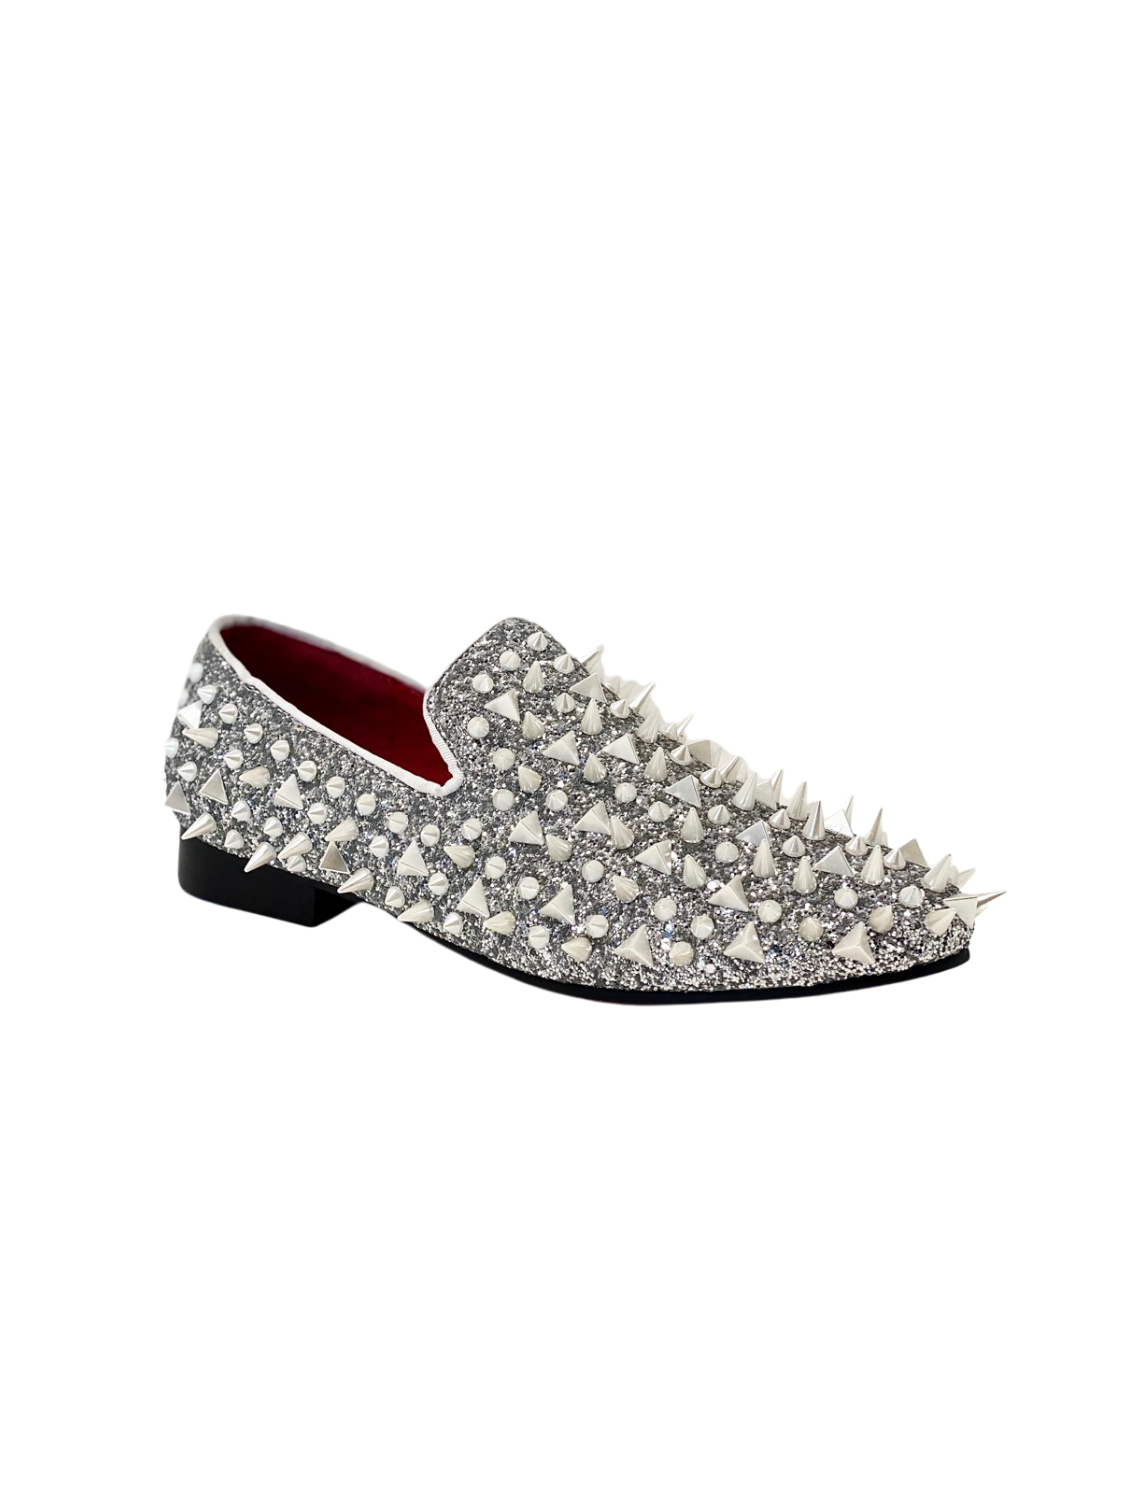 Fiesso Silver Loafer with White Spikes